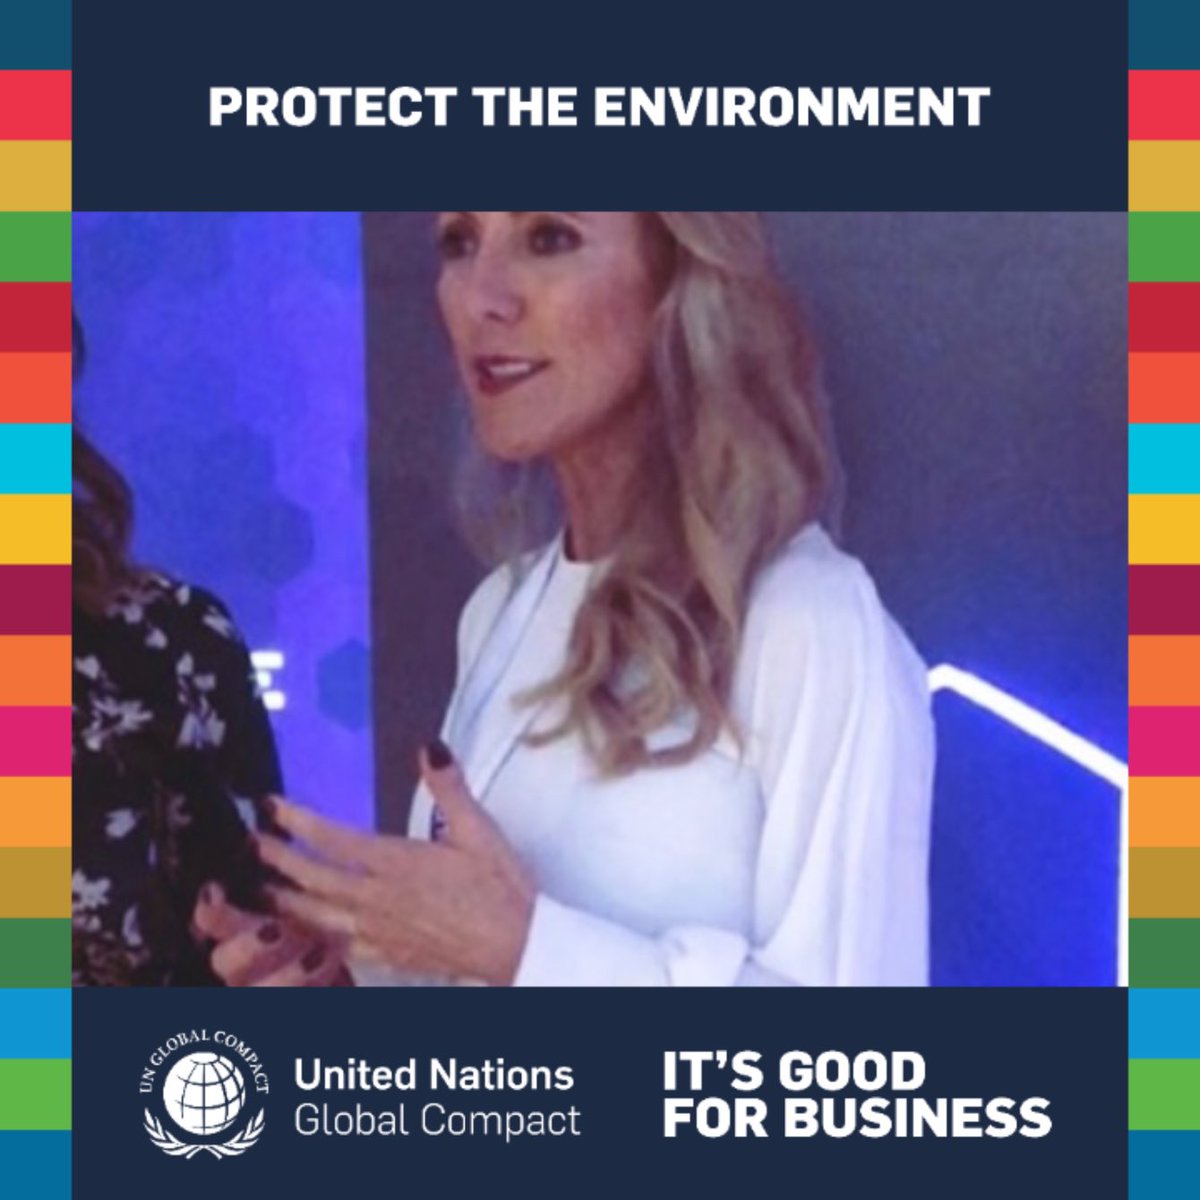 It's #goodforbusiness to protect the environment! Join me in advocating for the UN @globalcompact #TenPrinciples and the #GlobalGoals. #UnitingBusiness